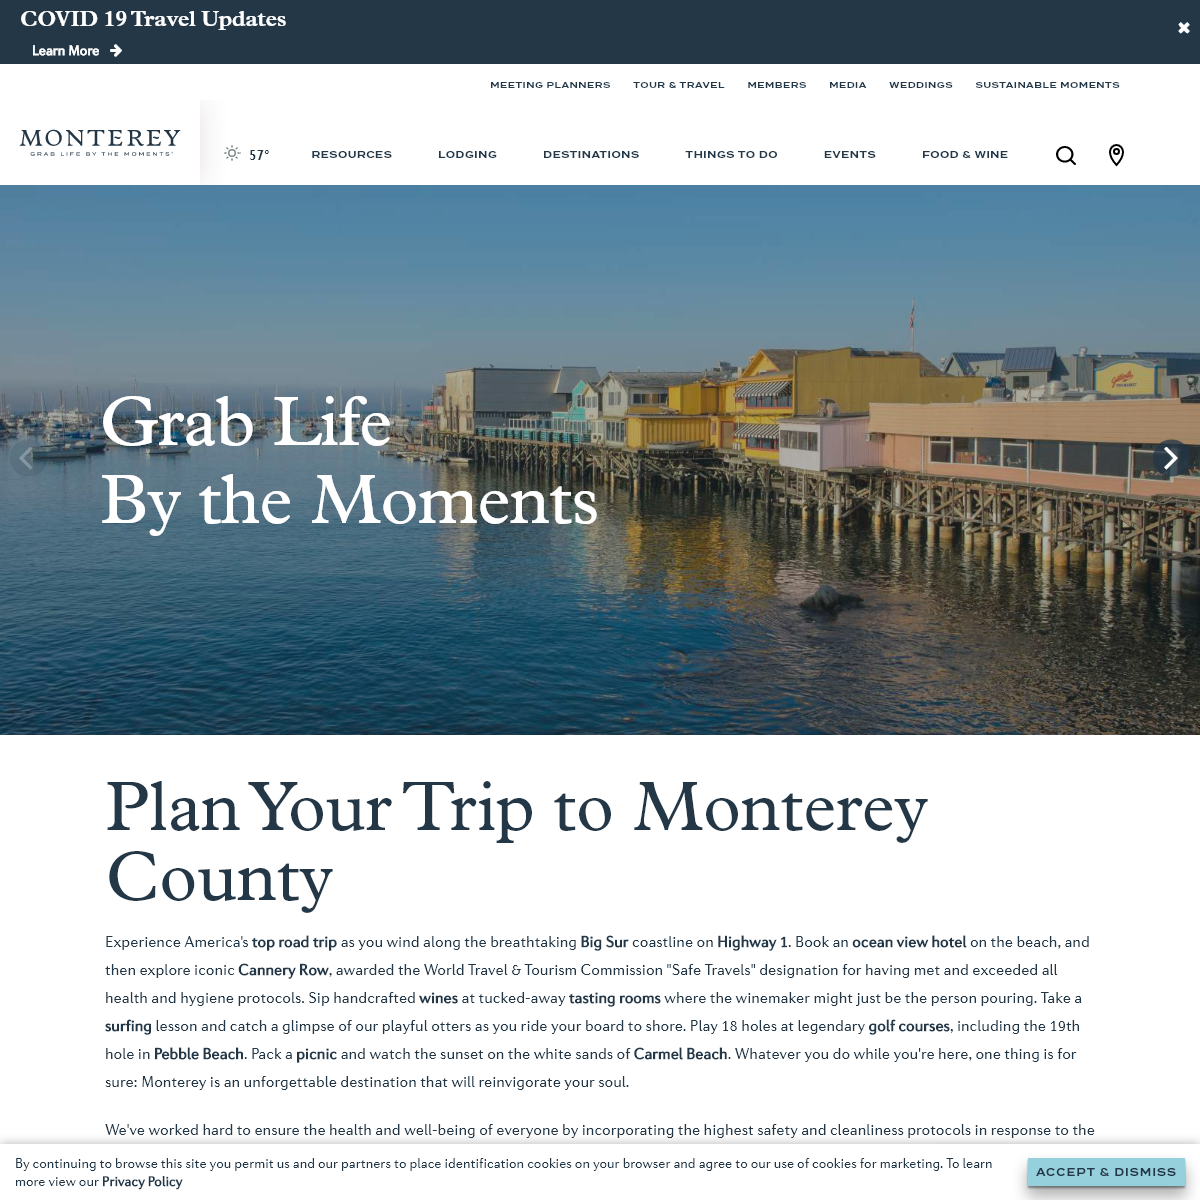 A complete backup of seemonterey.com